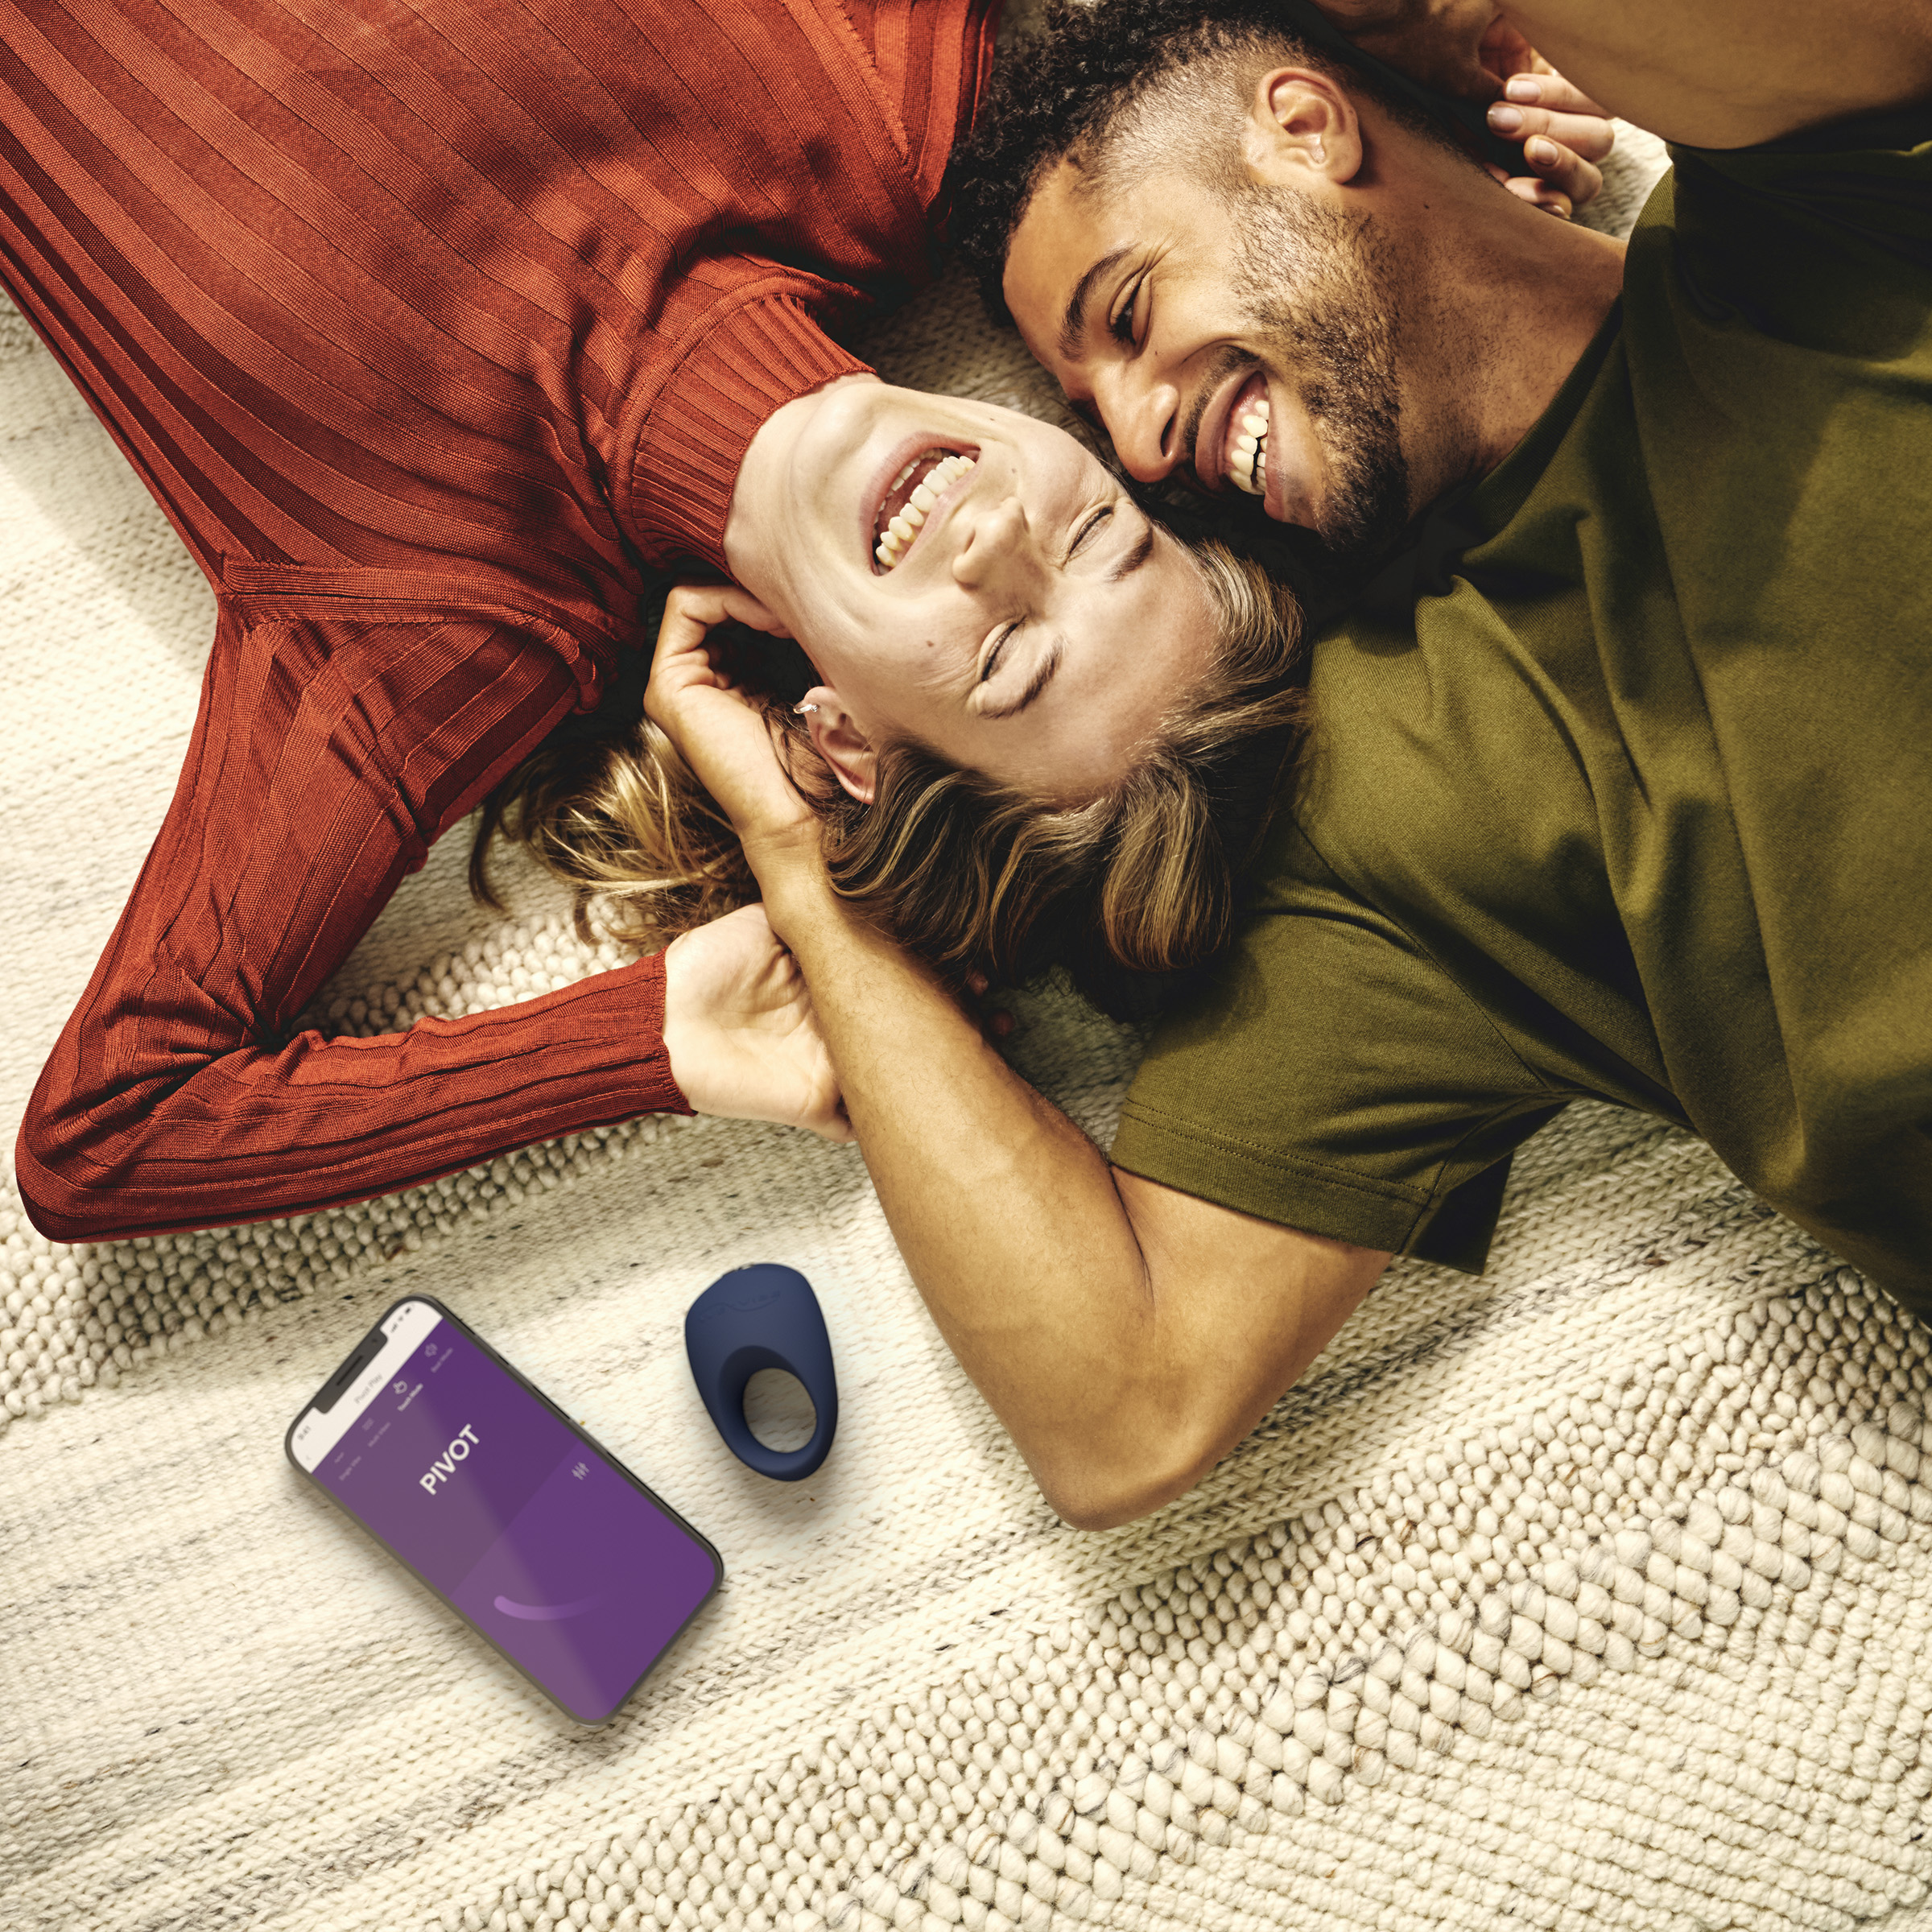 We-Vibe Pivot Wearable Vibrating Ring with Remote and App, Blue - image 5 of 9